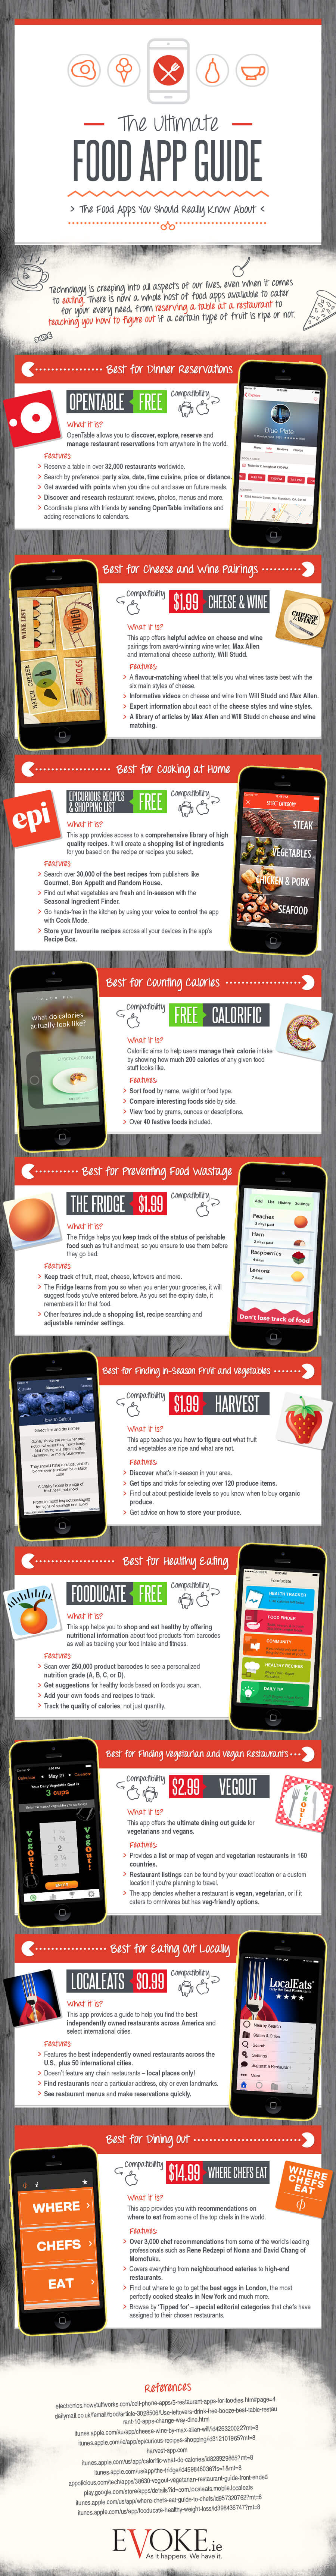 the-food-apps-you-should-really-know-about-infographic